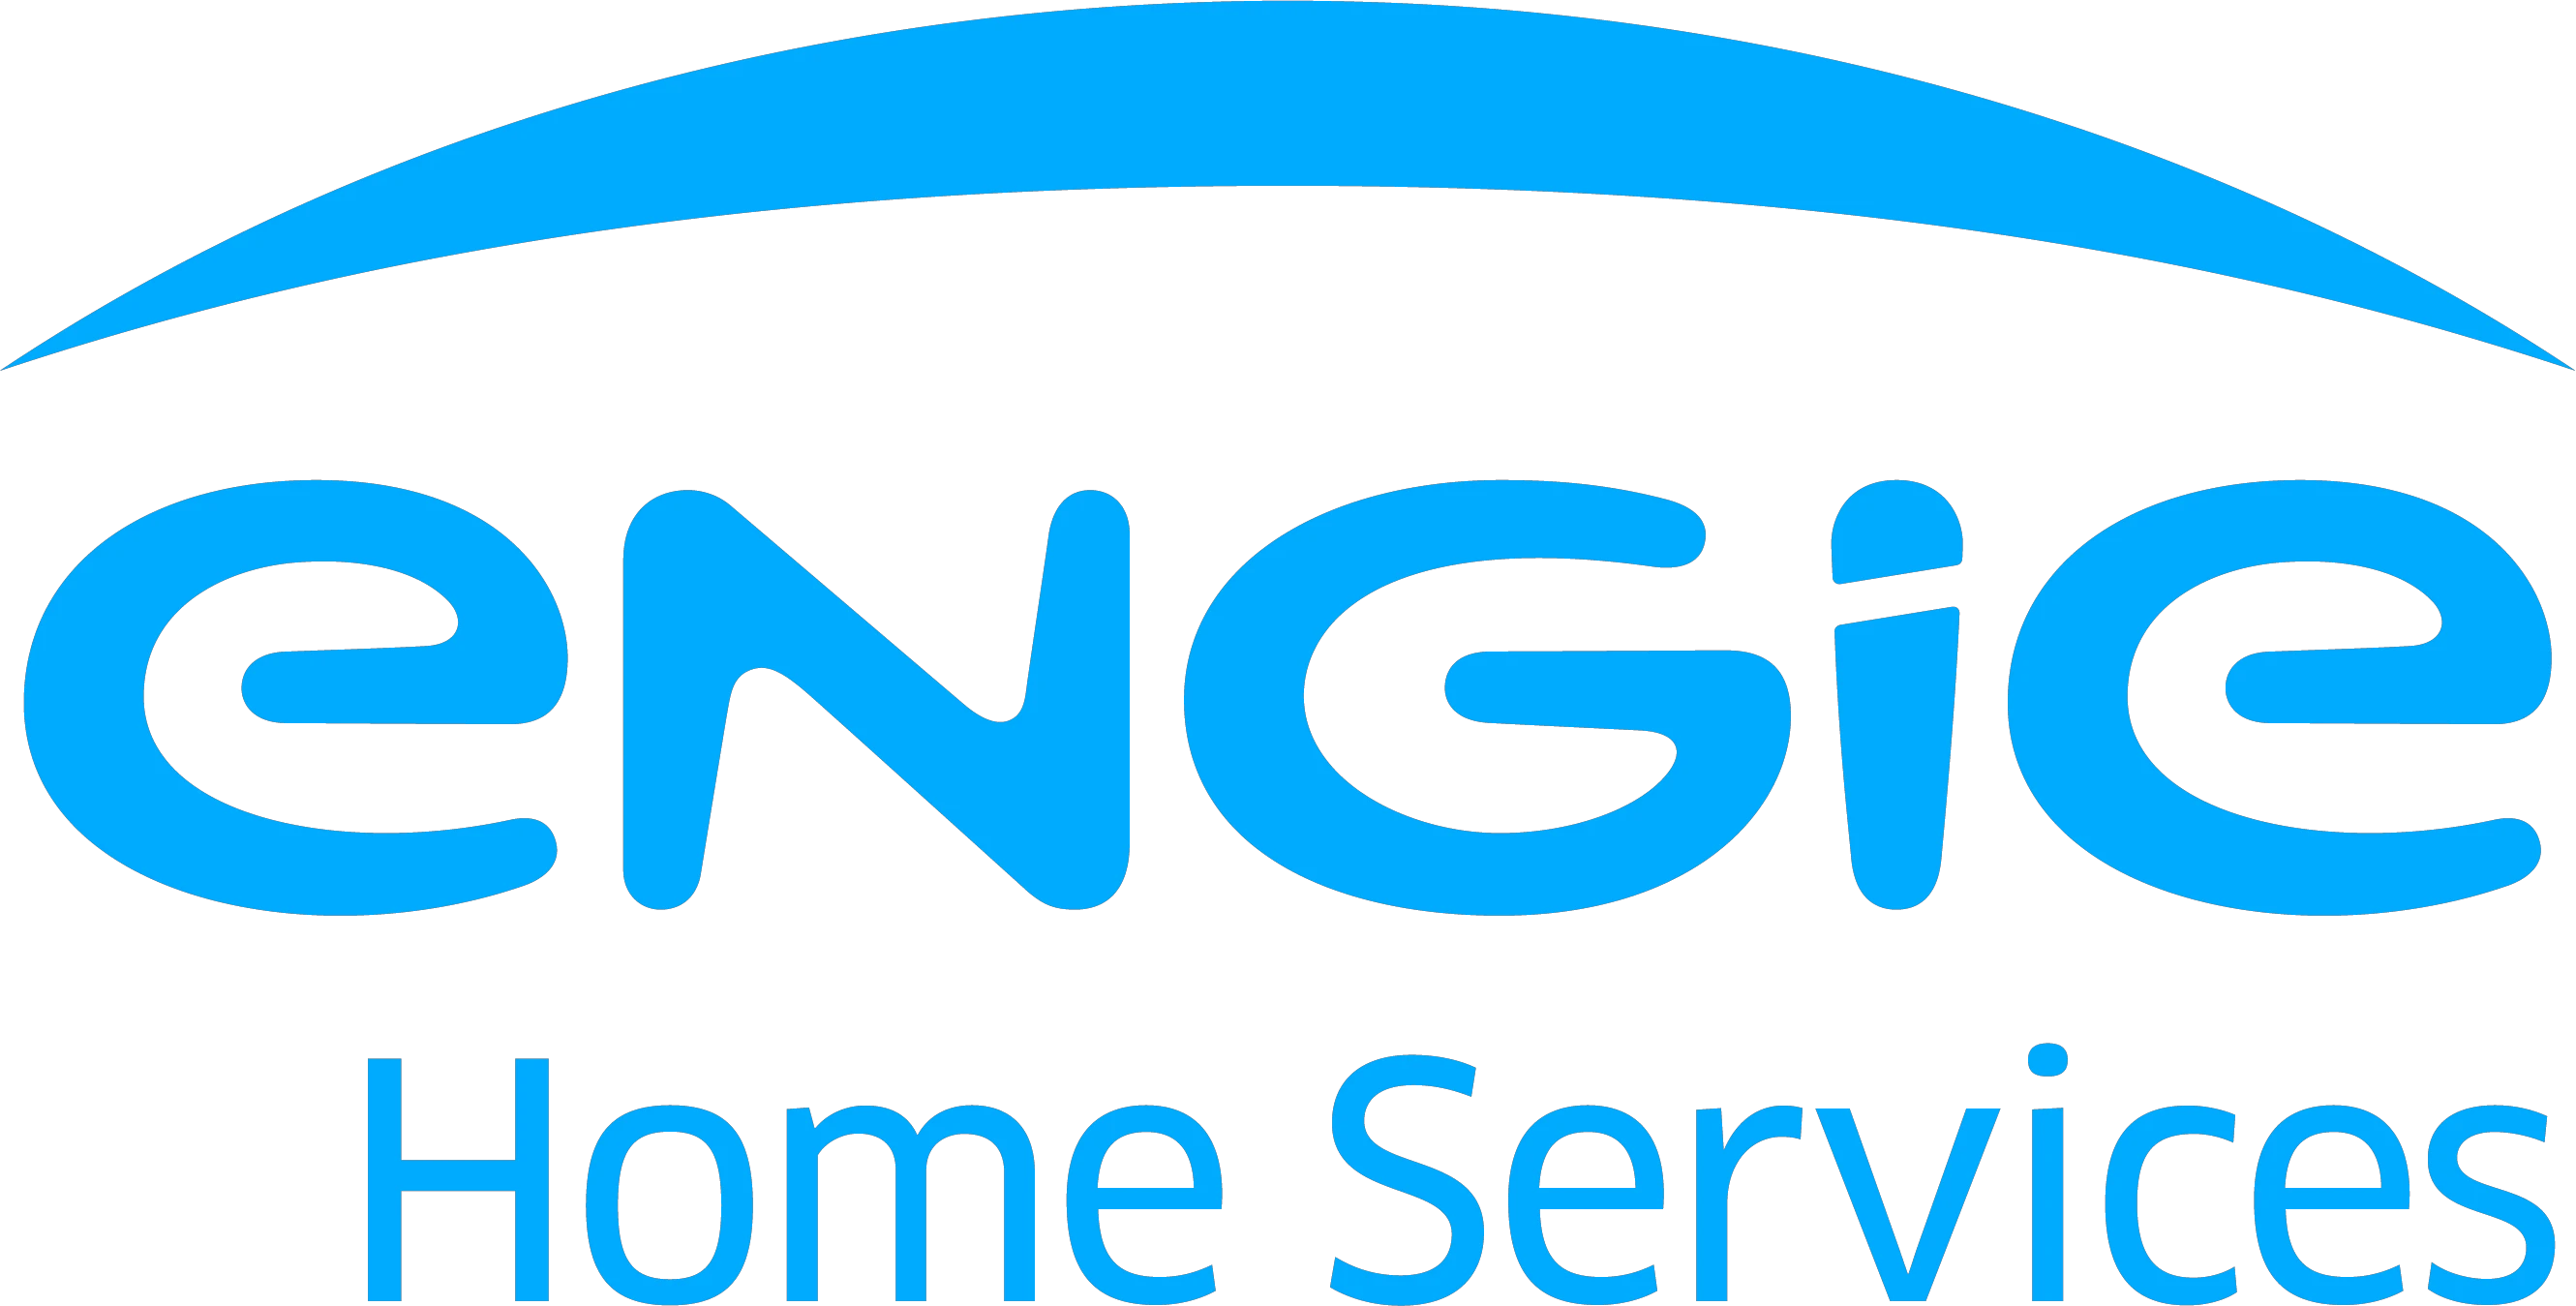  Engie Homeservices